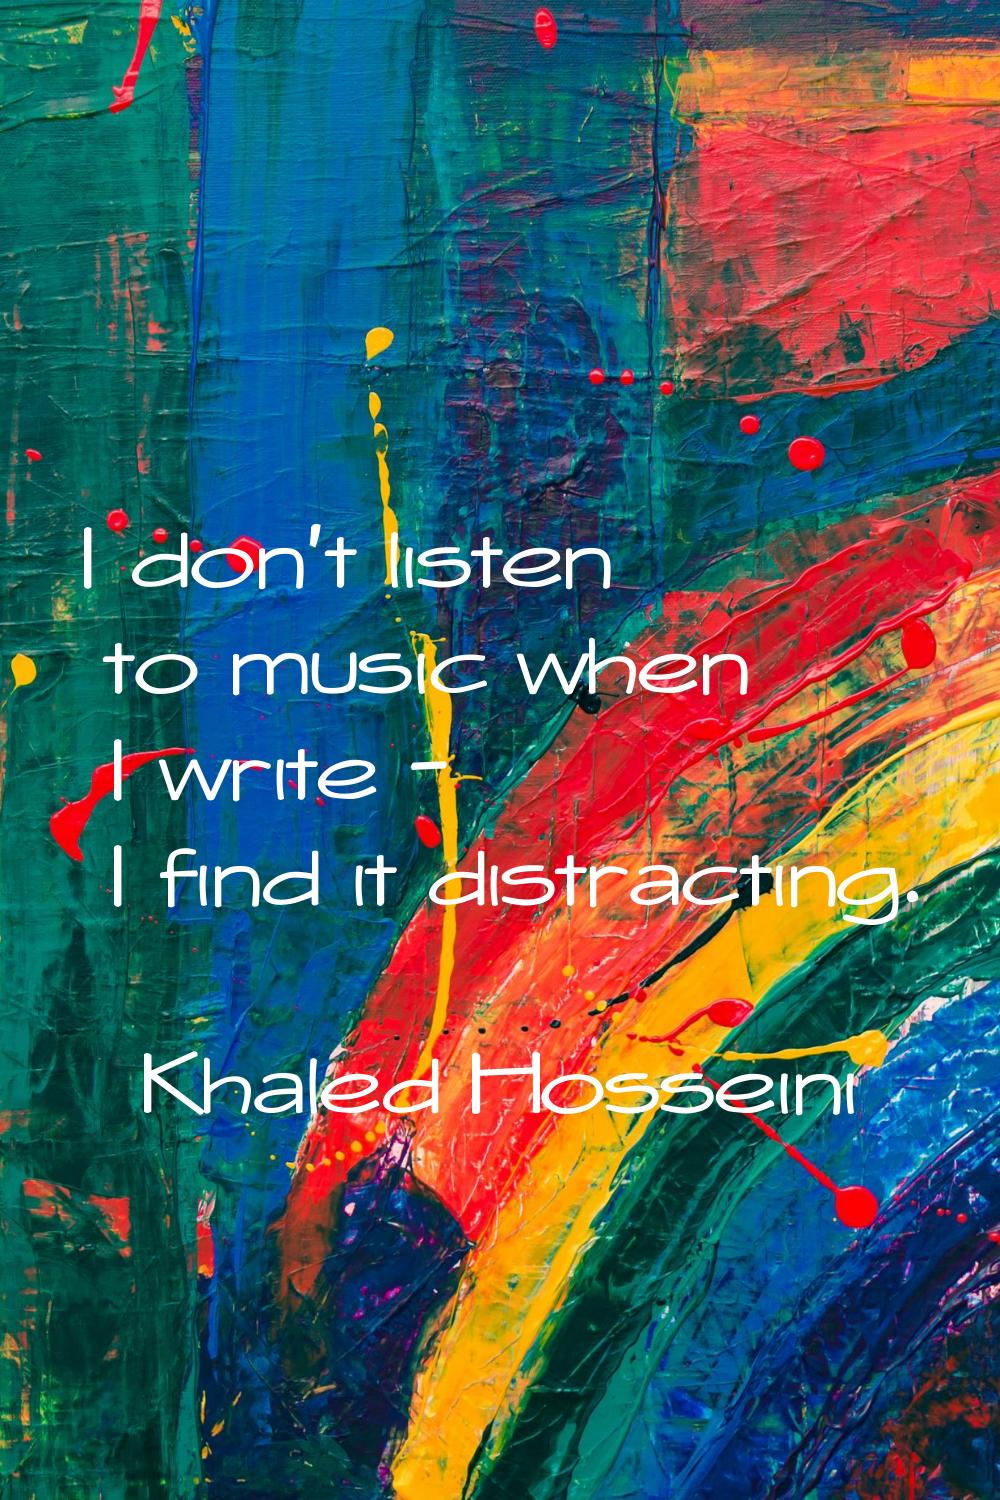 I don't listen to music when I write - I find it distracting.